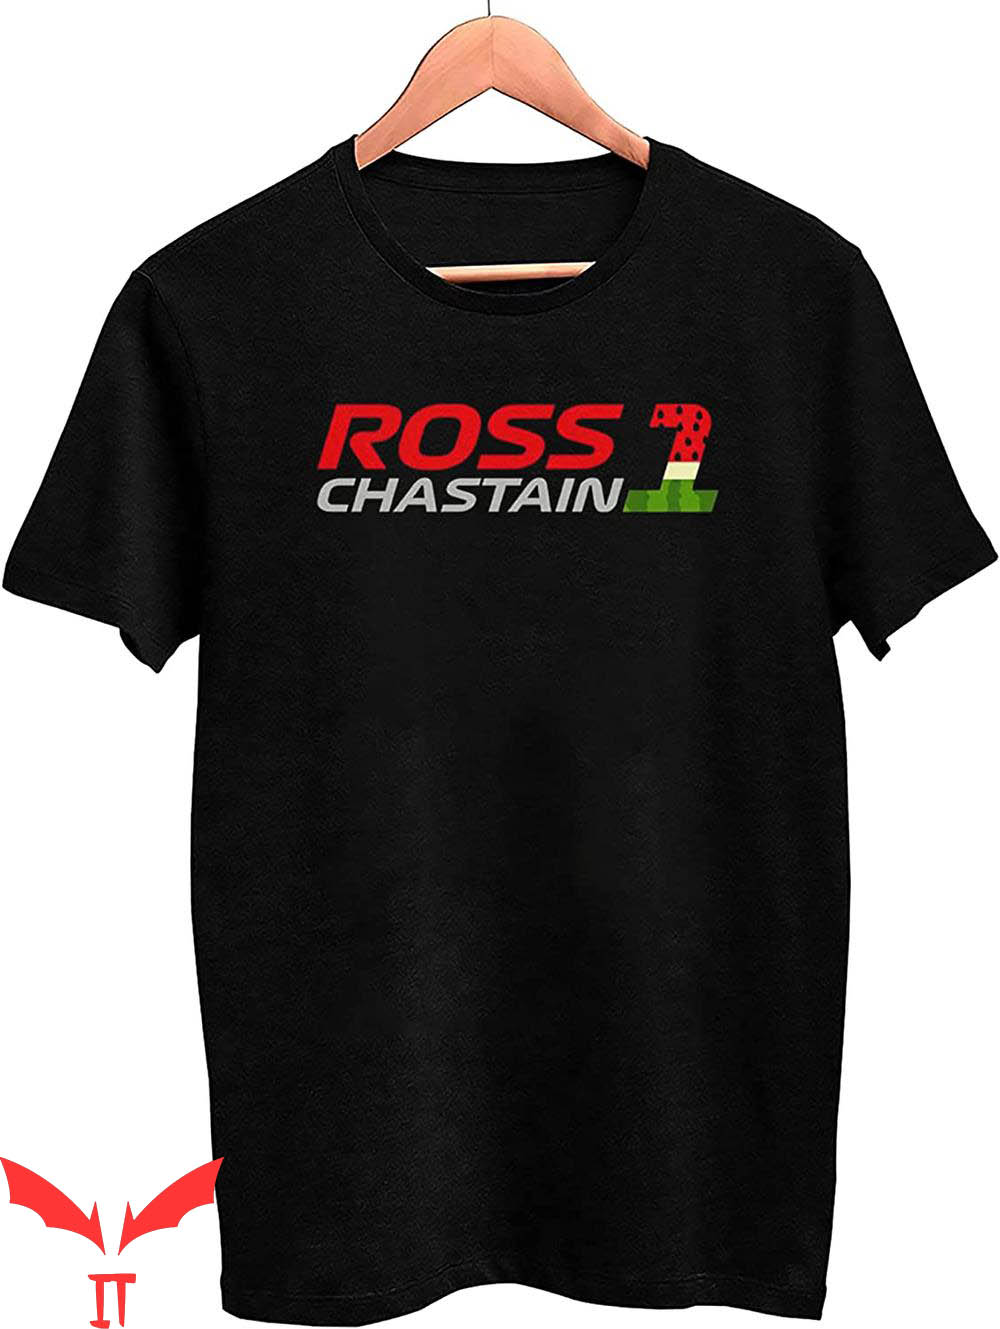 Ross Chastain T-Shirt 1 Watermelon Cool Tee For Racing Fans